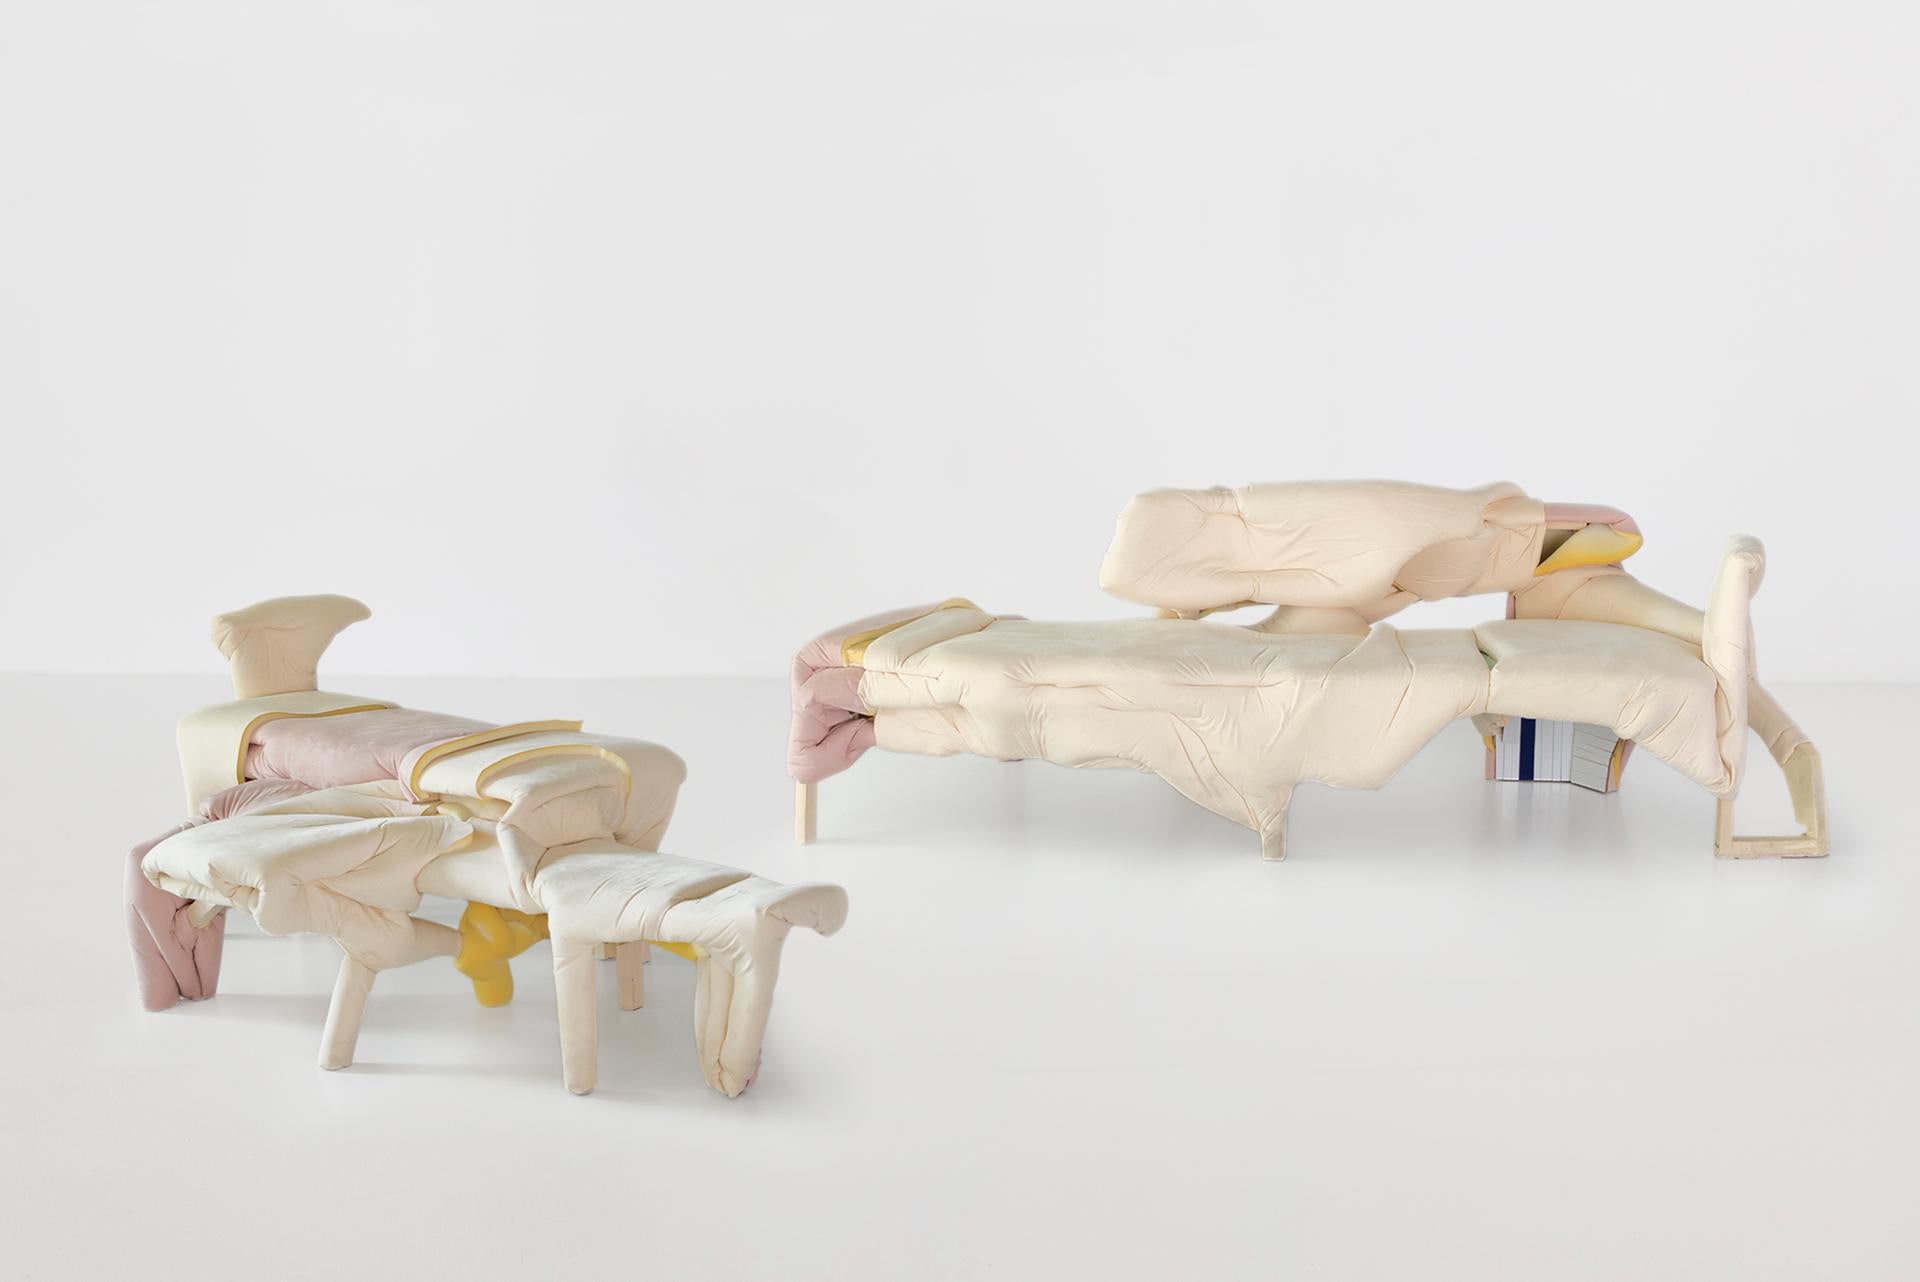 Carlos Fernández Pello Contemporary Bench from the Series 